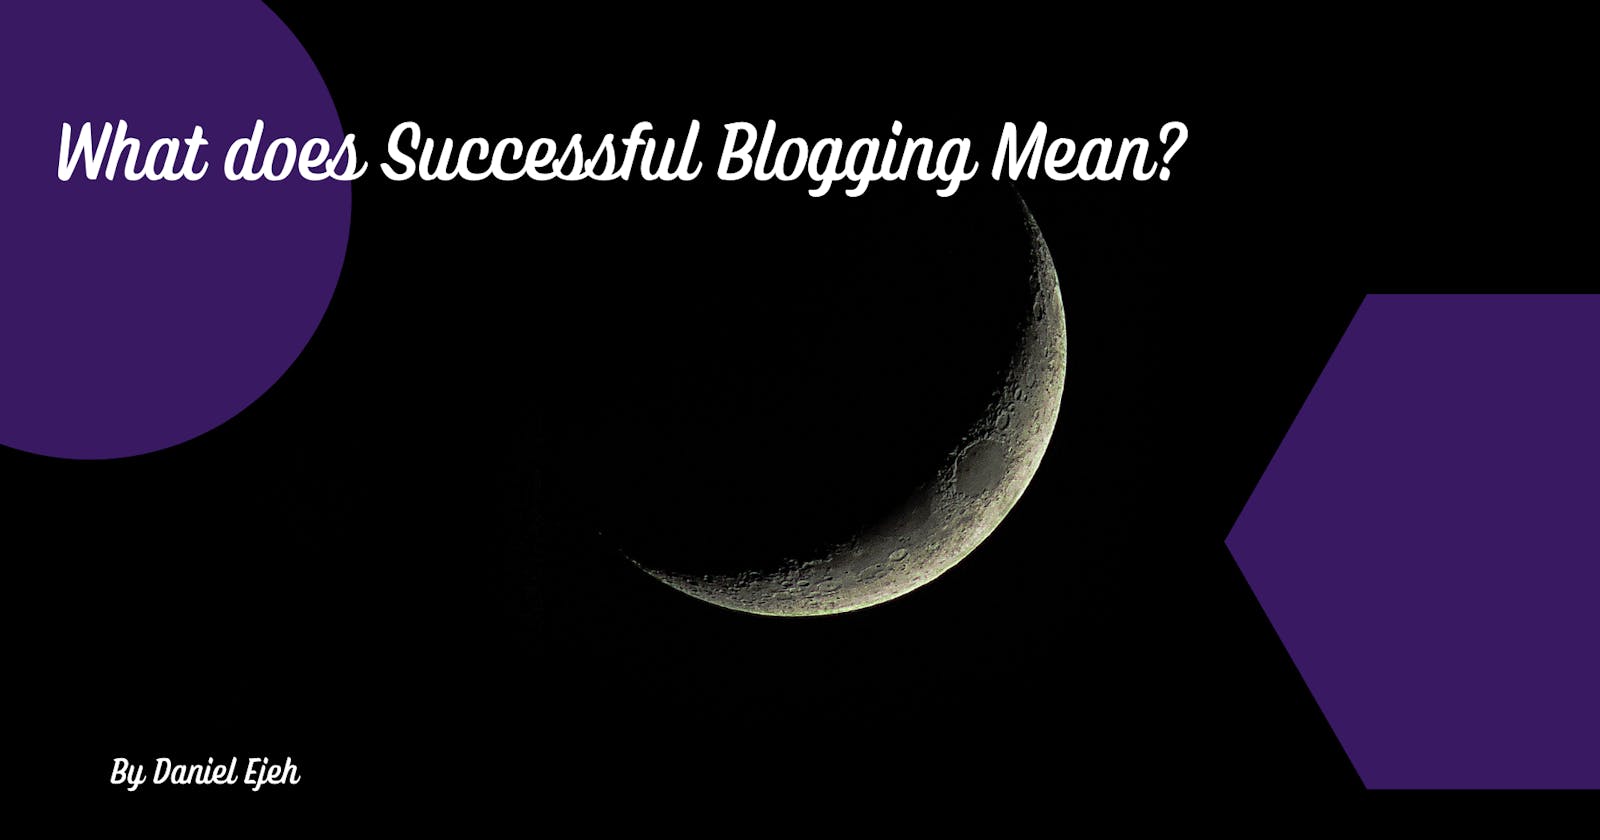 What does Successful Blogging Mean To Me?